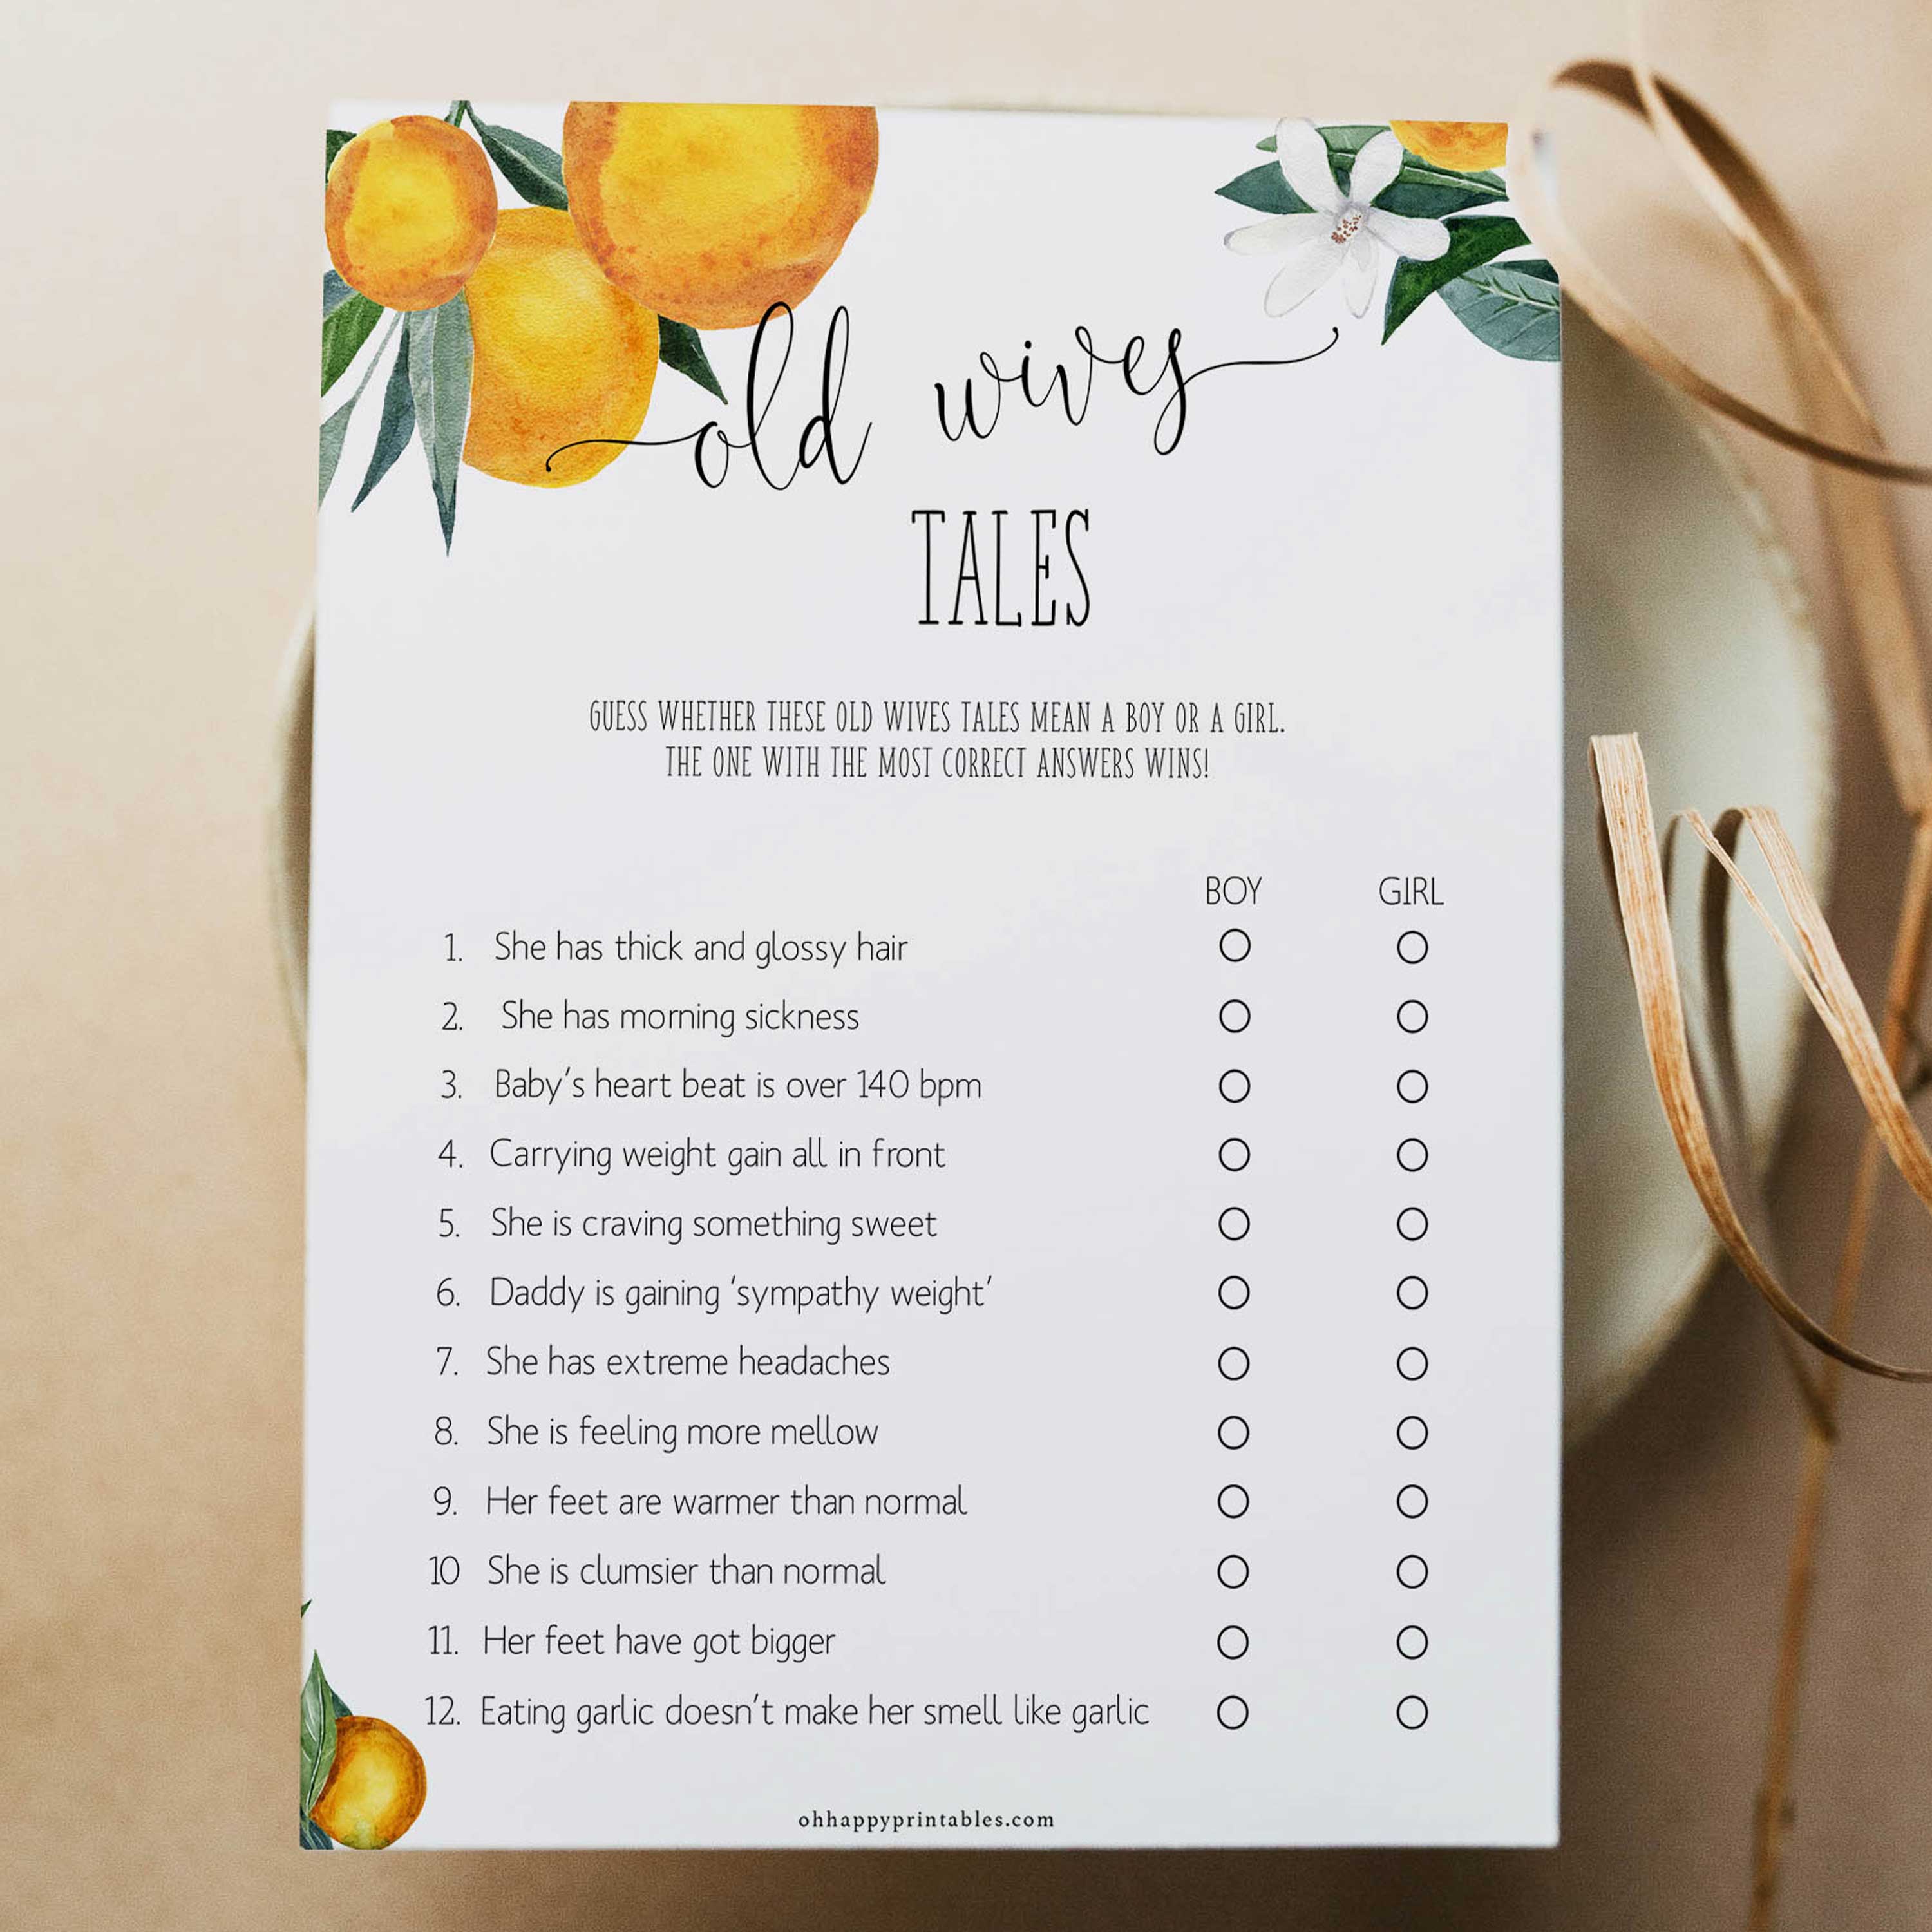 old wives tale baby shower game, Printable baby shower games, little cutie baby games, baby shower games, fun baby shower ideas, top baby shower ideas, little cutie baby shower, baby shower games, fun little cutie baby shower ideas, citrus baby shower games, citrus baby shower, orange baby shower